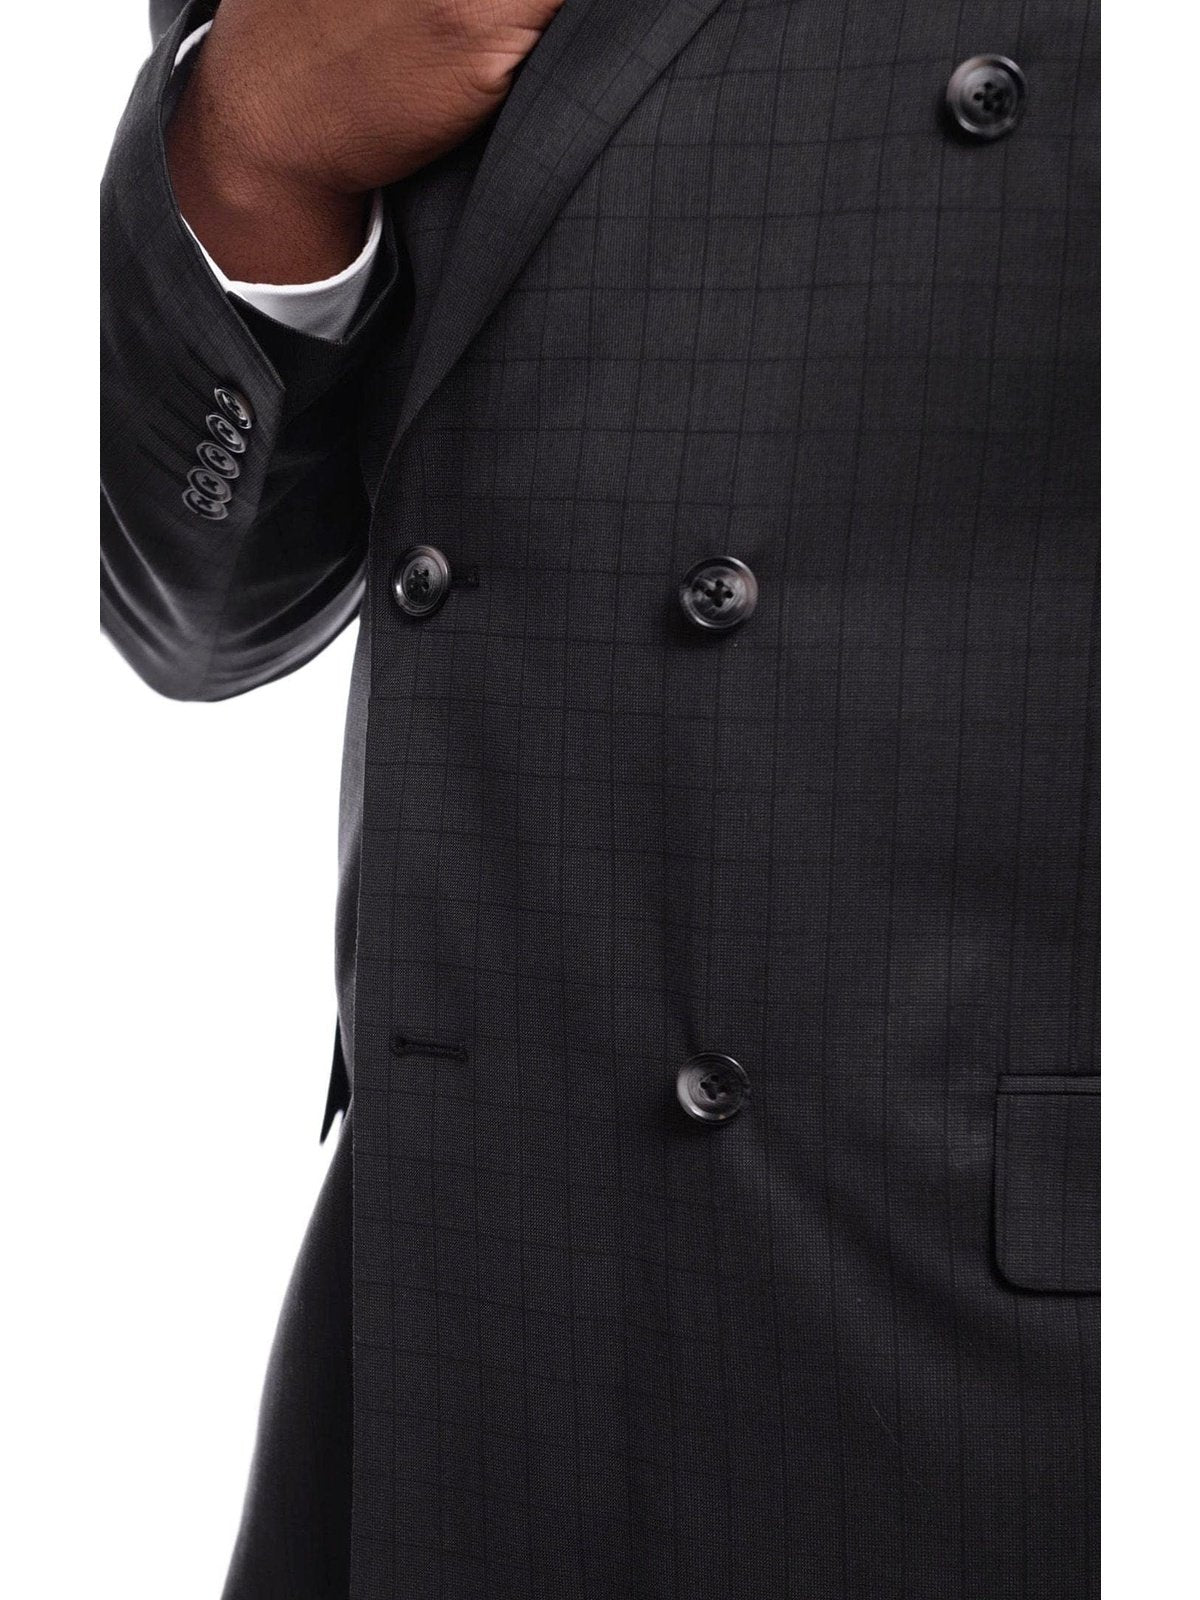 Steven Land TWO PIECE SUITS Steven Land Classic Fit Charcoal Gray Check Two Button Wool Suit